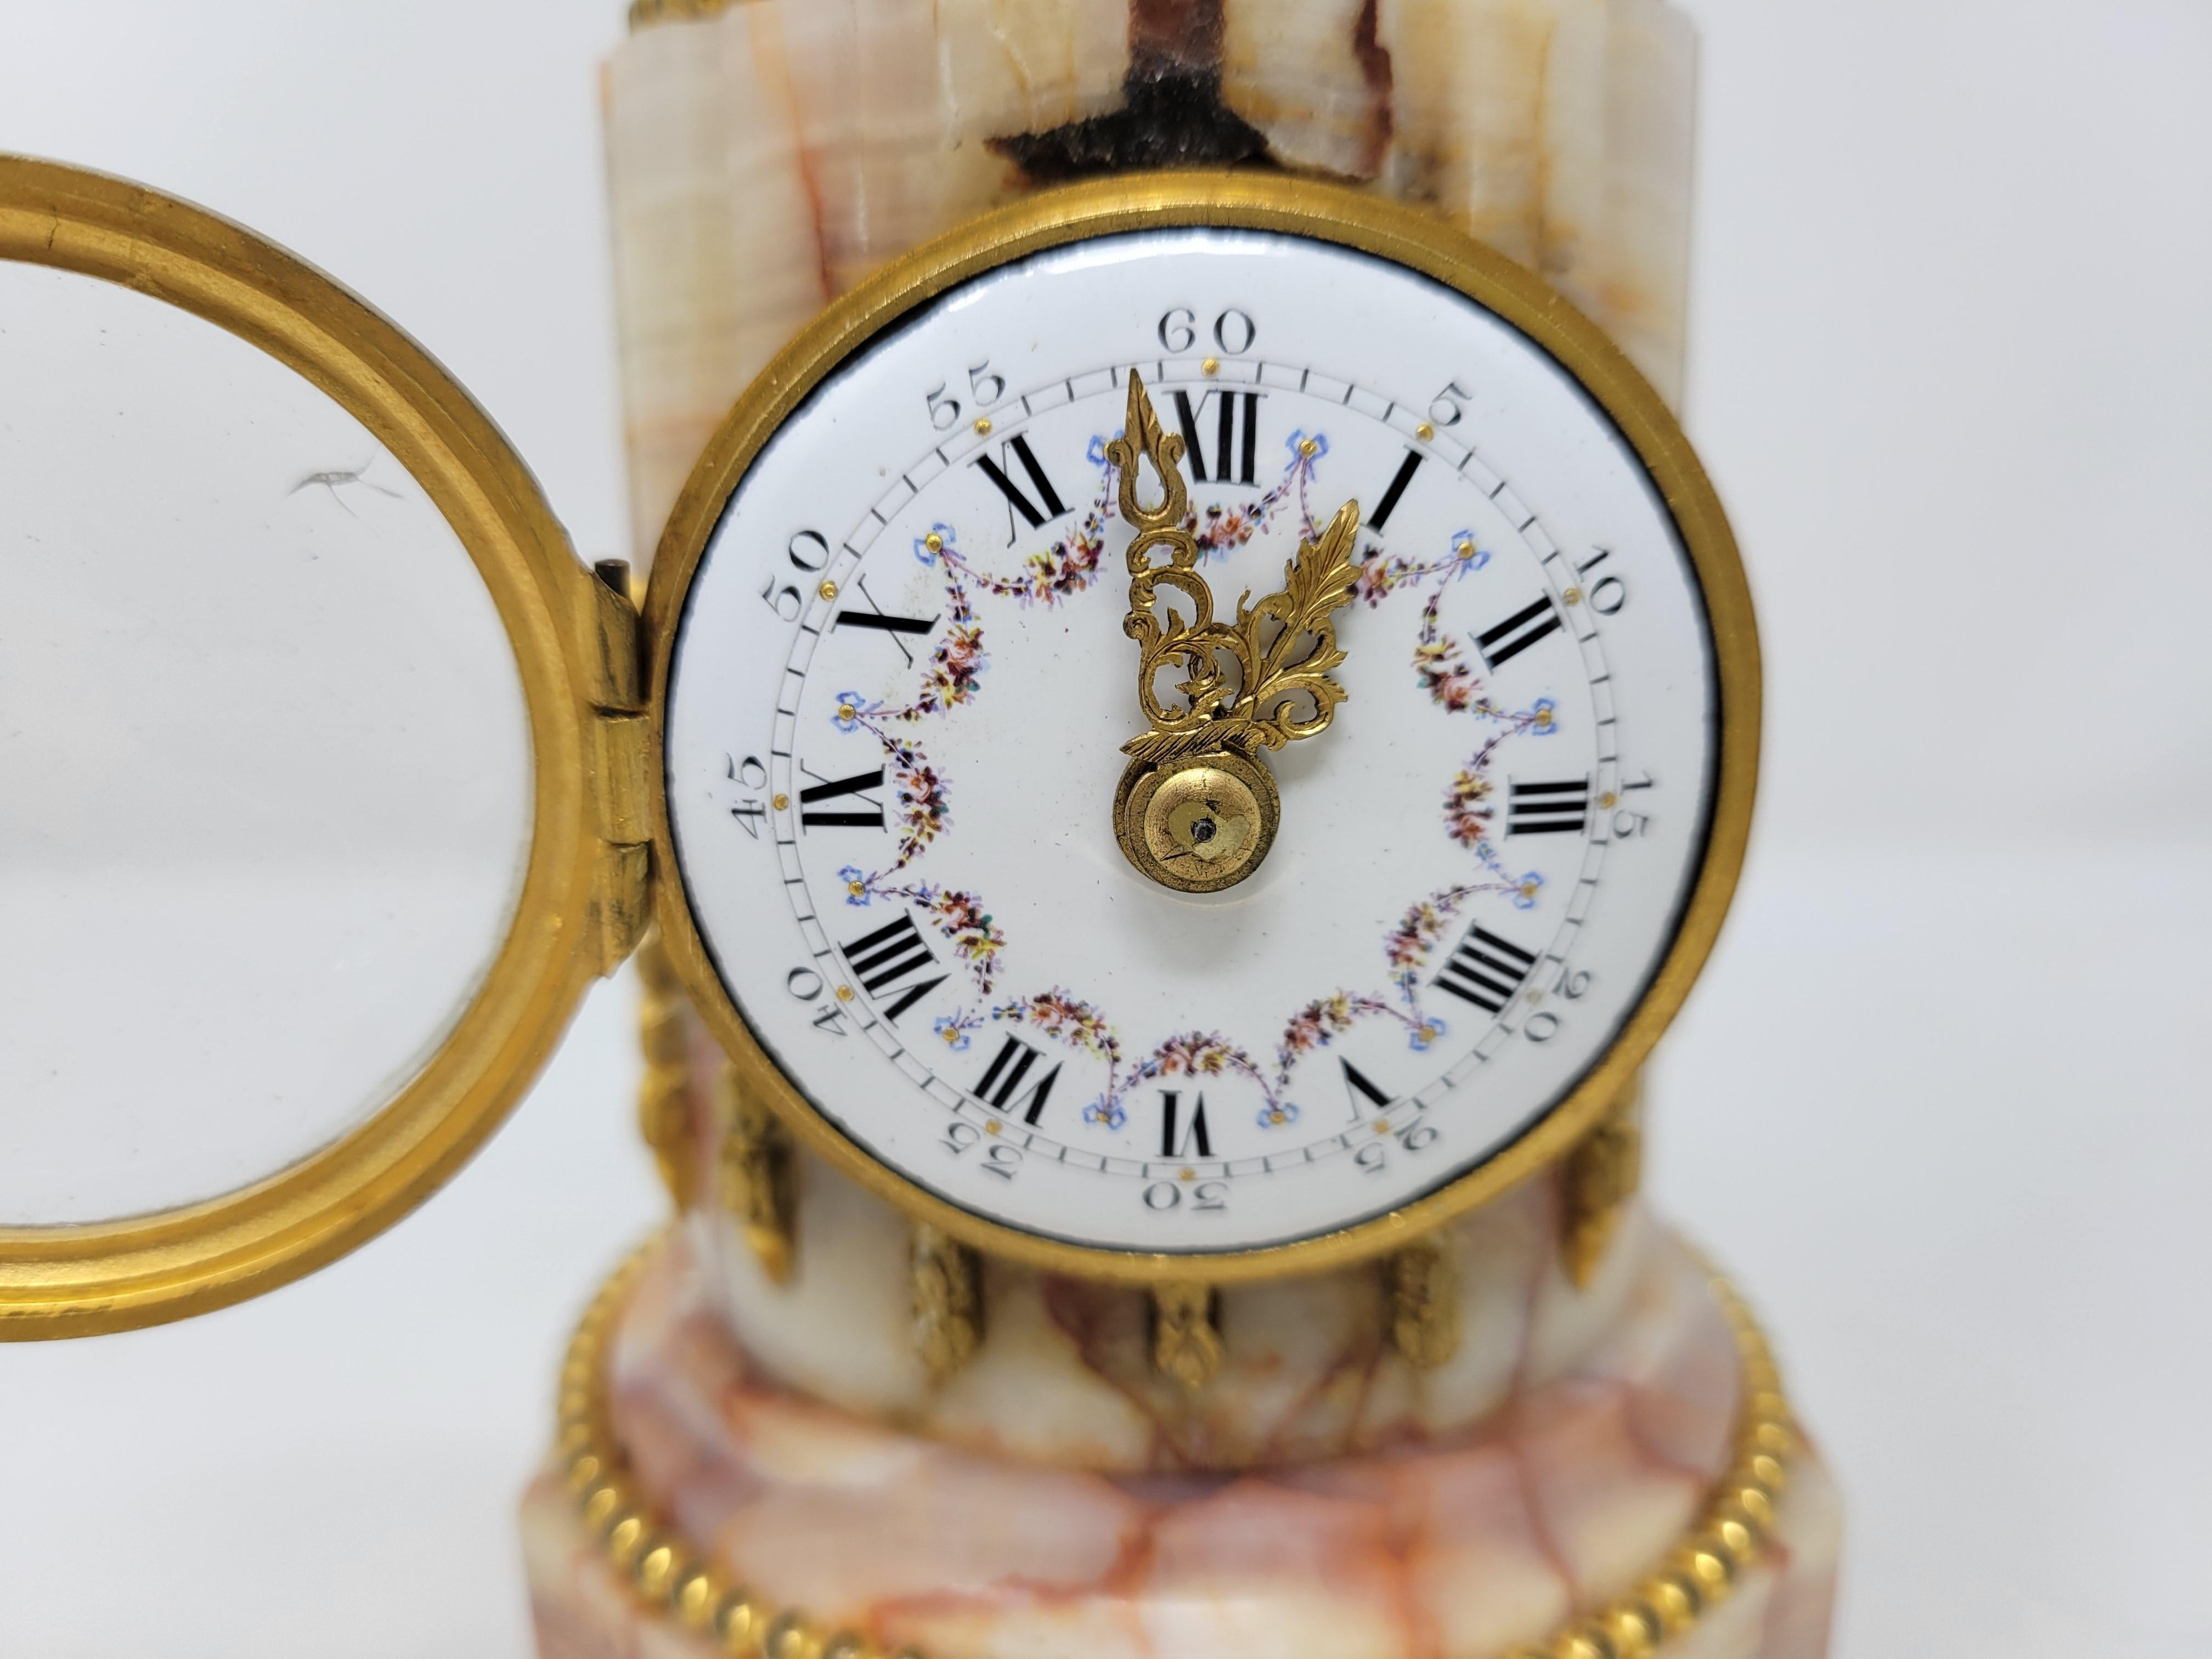 A very handsome little clock. The patterns in the pale rose/coral quartz are pleasing.